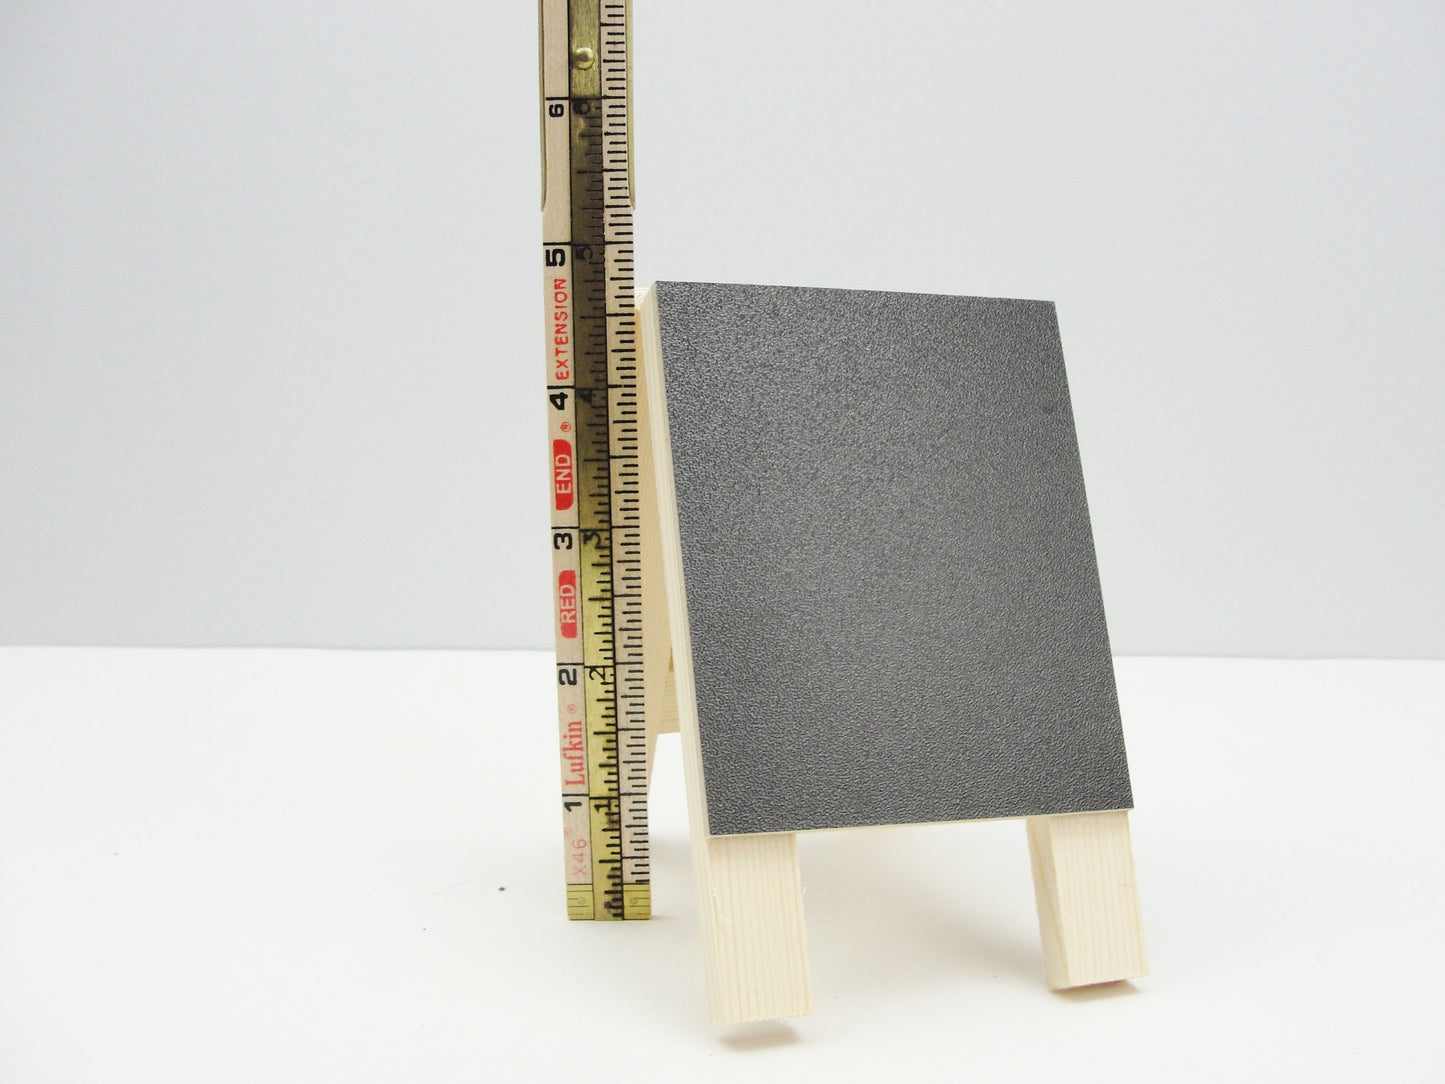 Miniature wood chalkboard easel - General Crafts - Craft Supply House